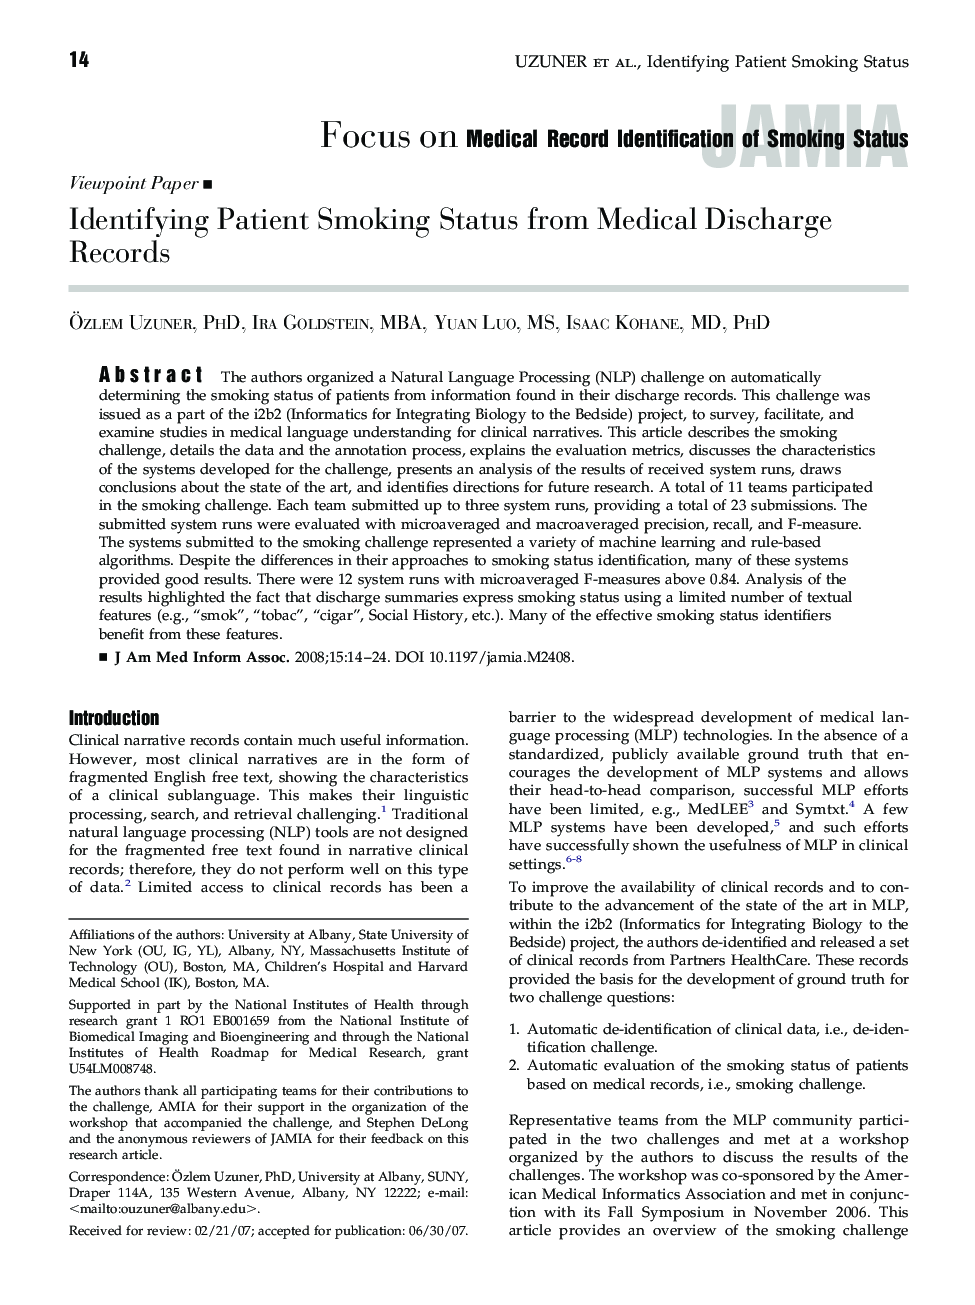 Identifying Patient Smoking Status from Medical Discharge Records 